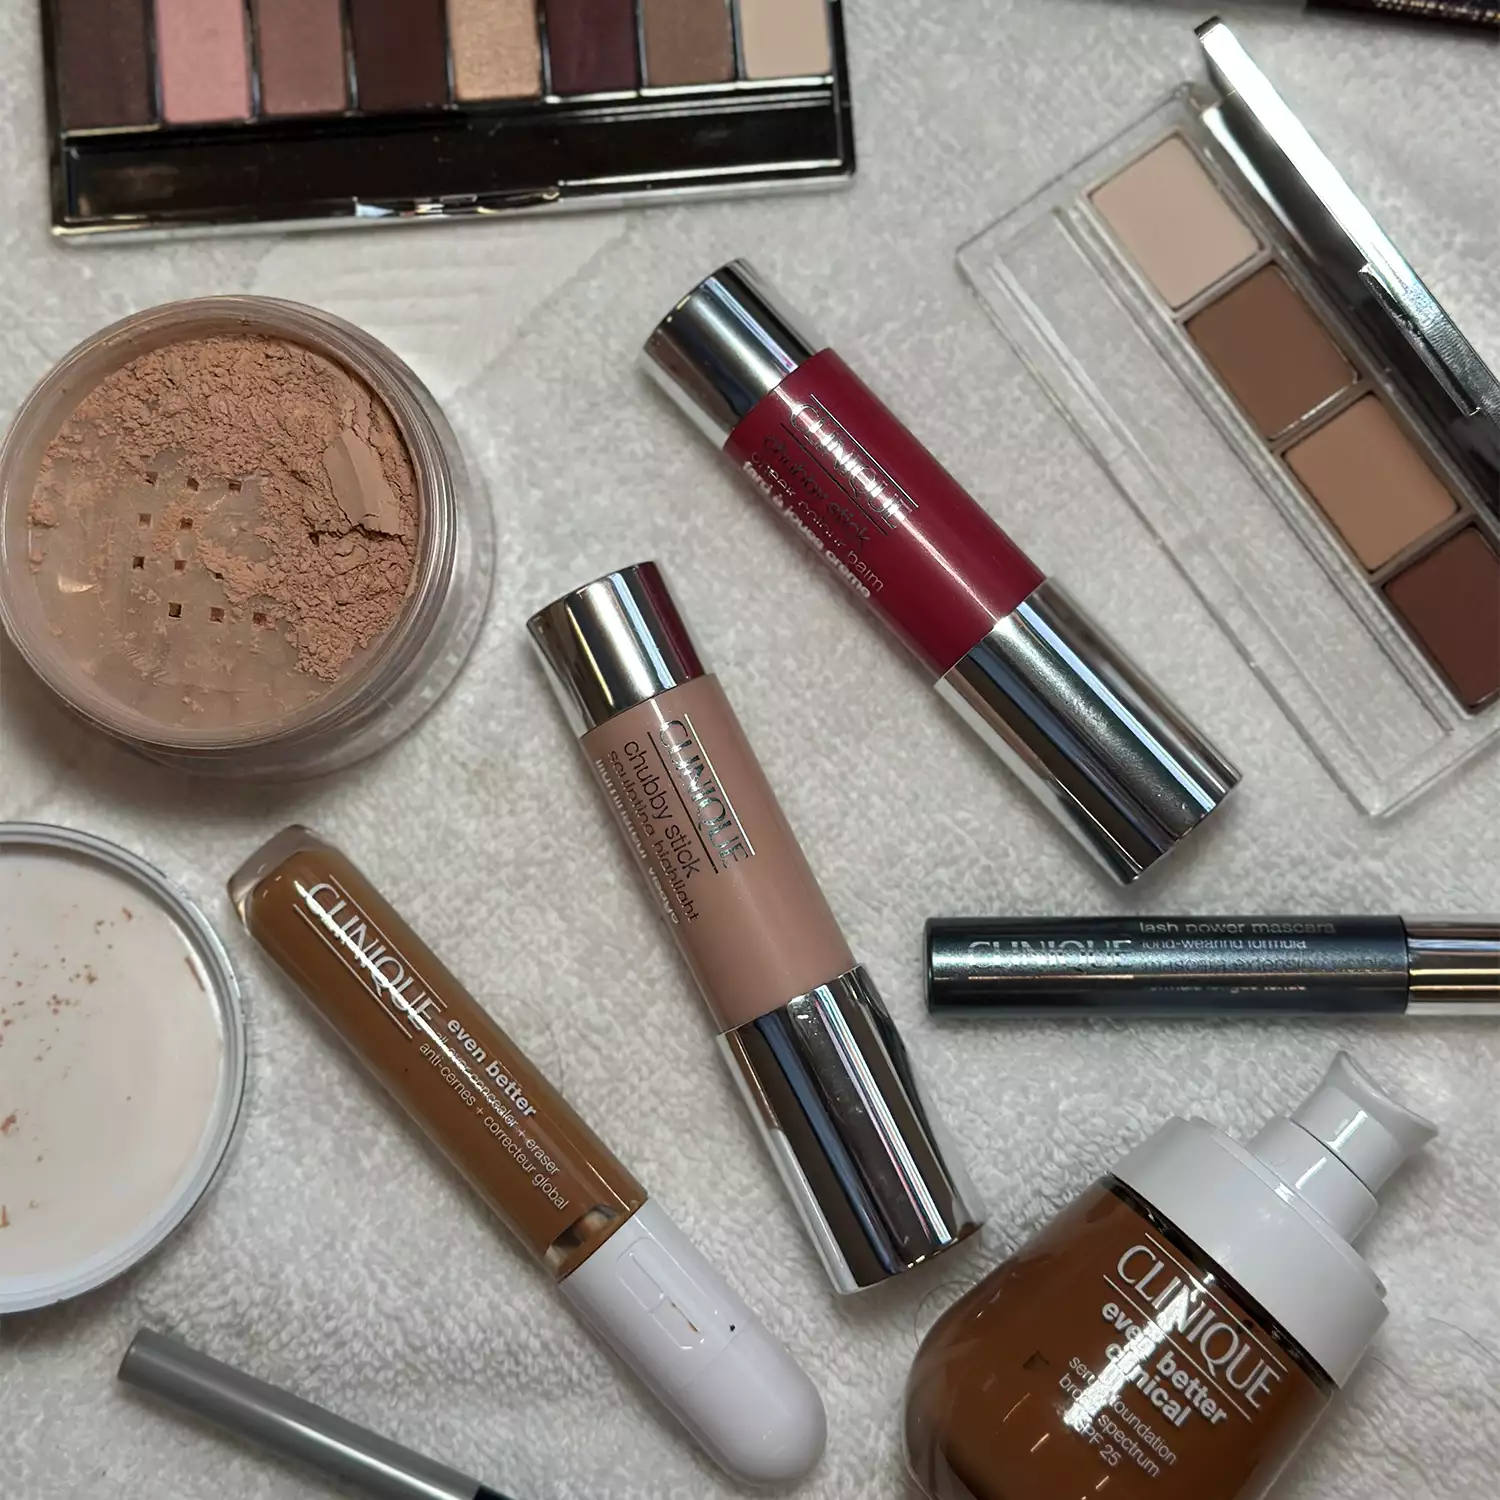 Best Tip for Cloud Skin That Stays Put on Stage: The Even Better All Over Concealers